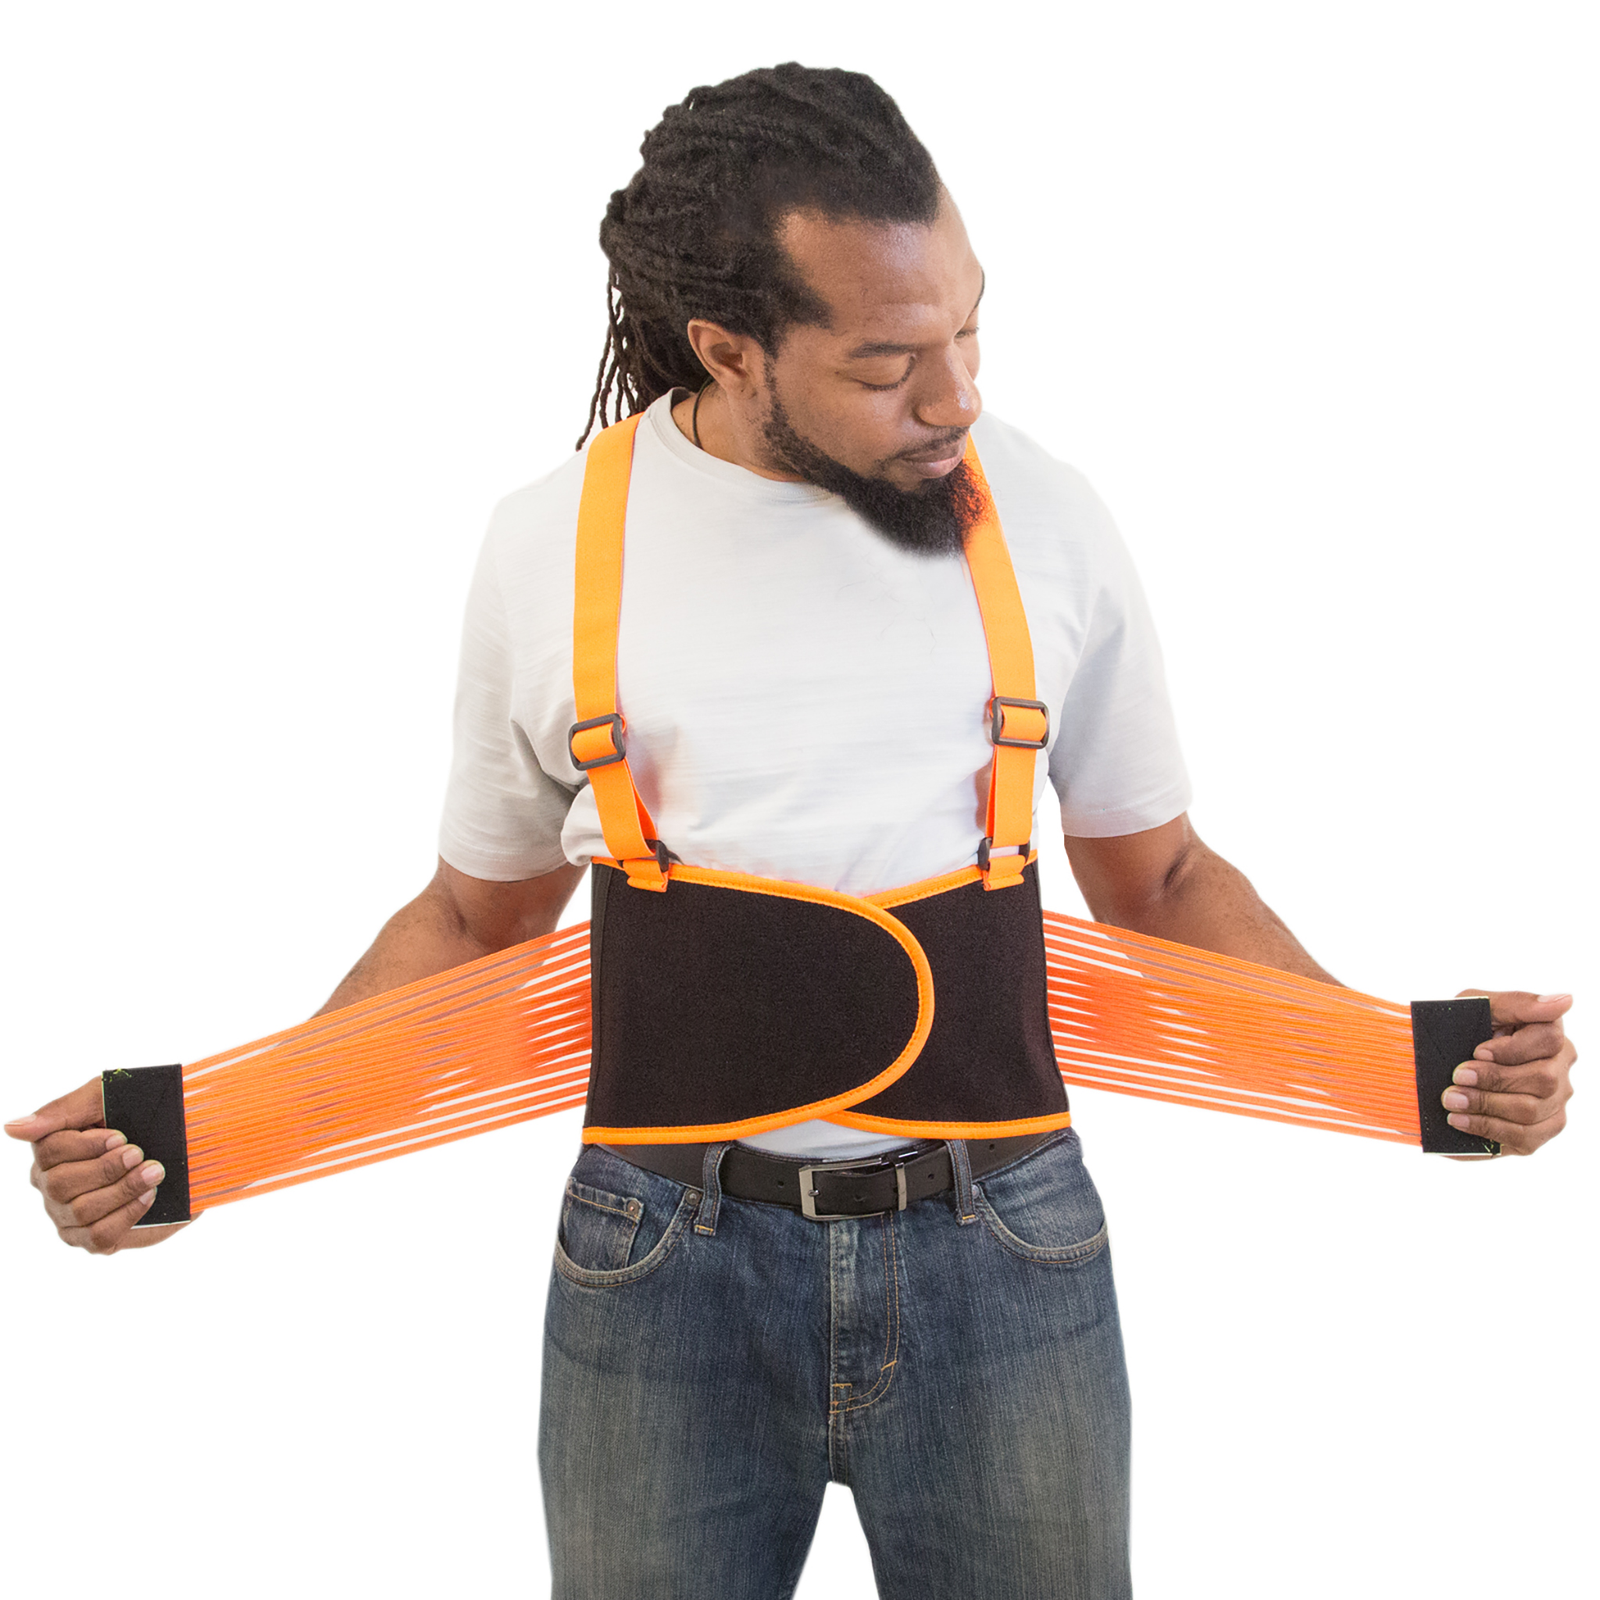 A man putting on the back support belt with elastic waits straps. He is stretching the elastic straps to close them in front of his stomach with a hook and loop system